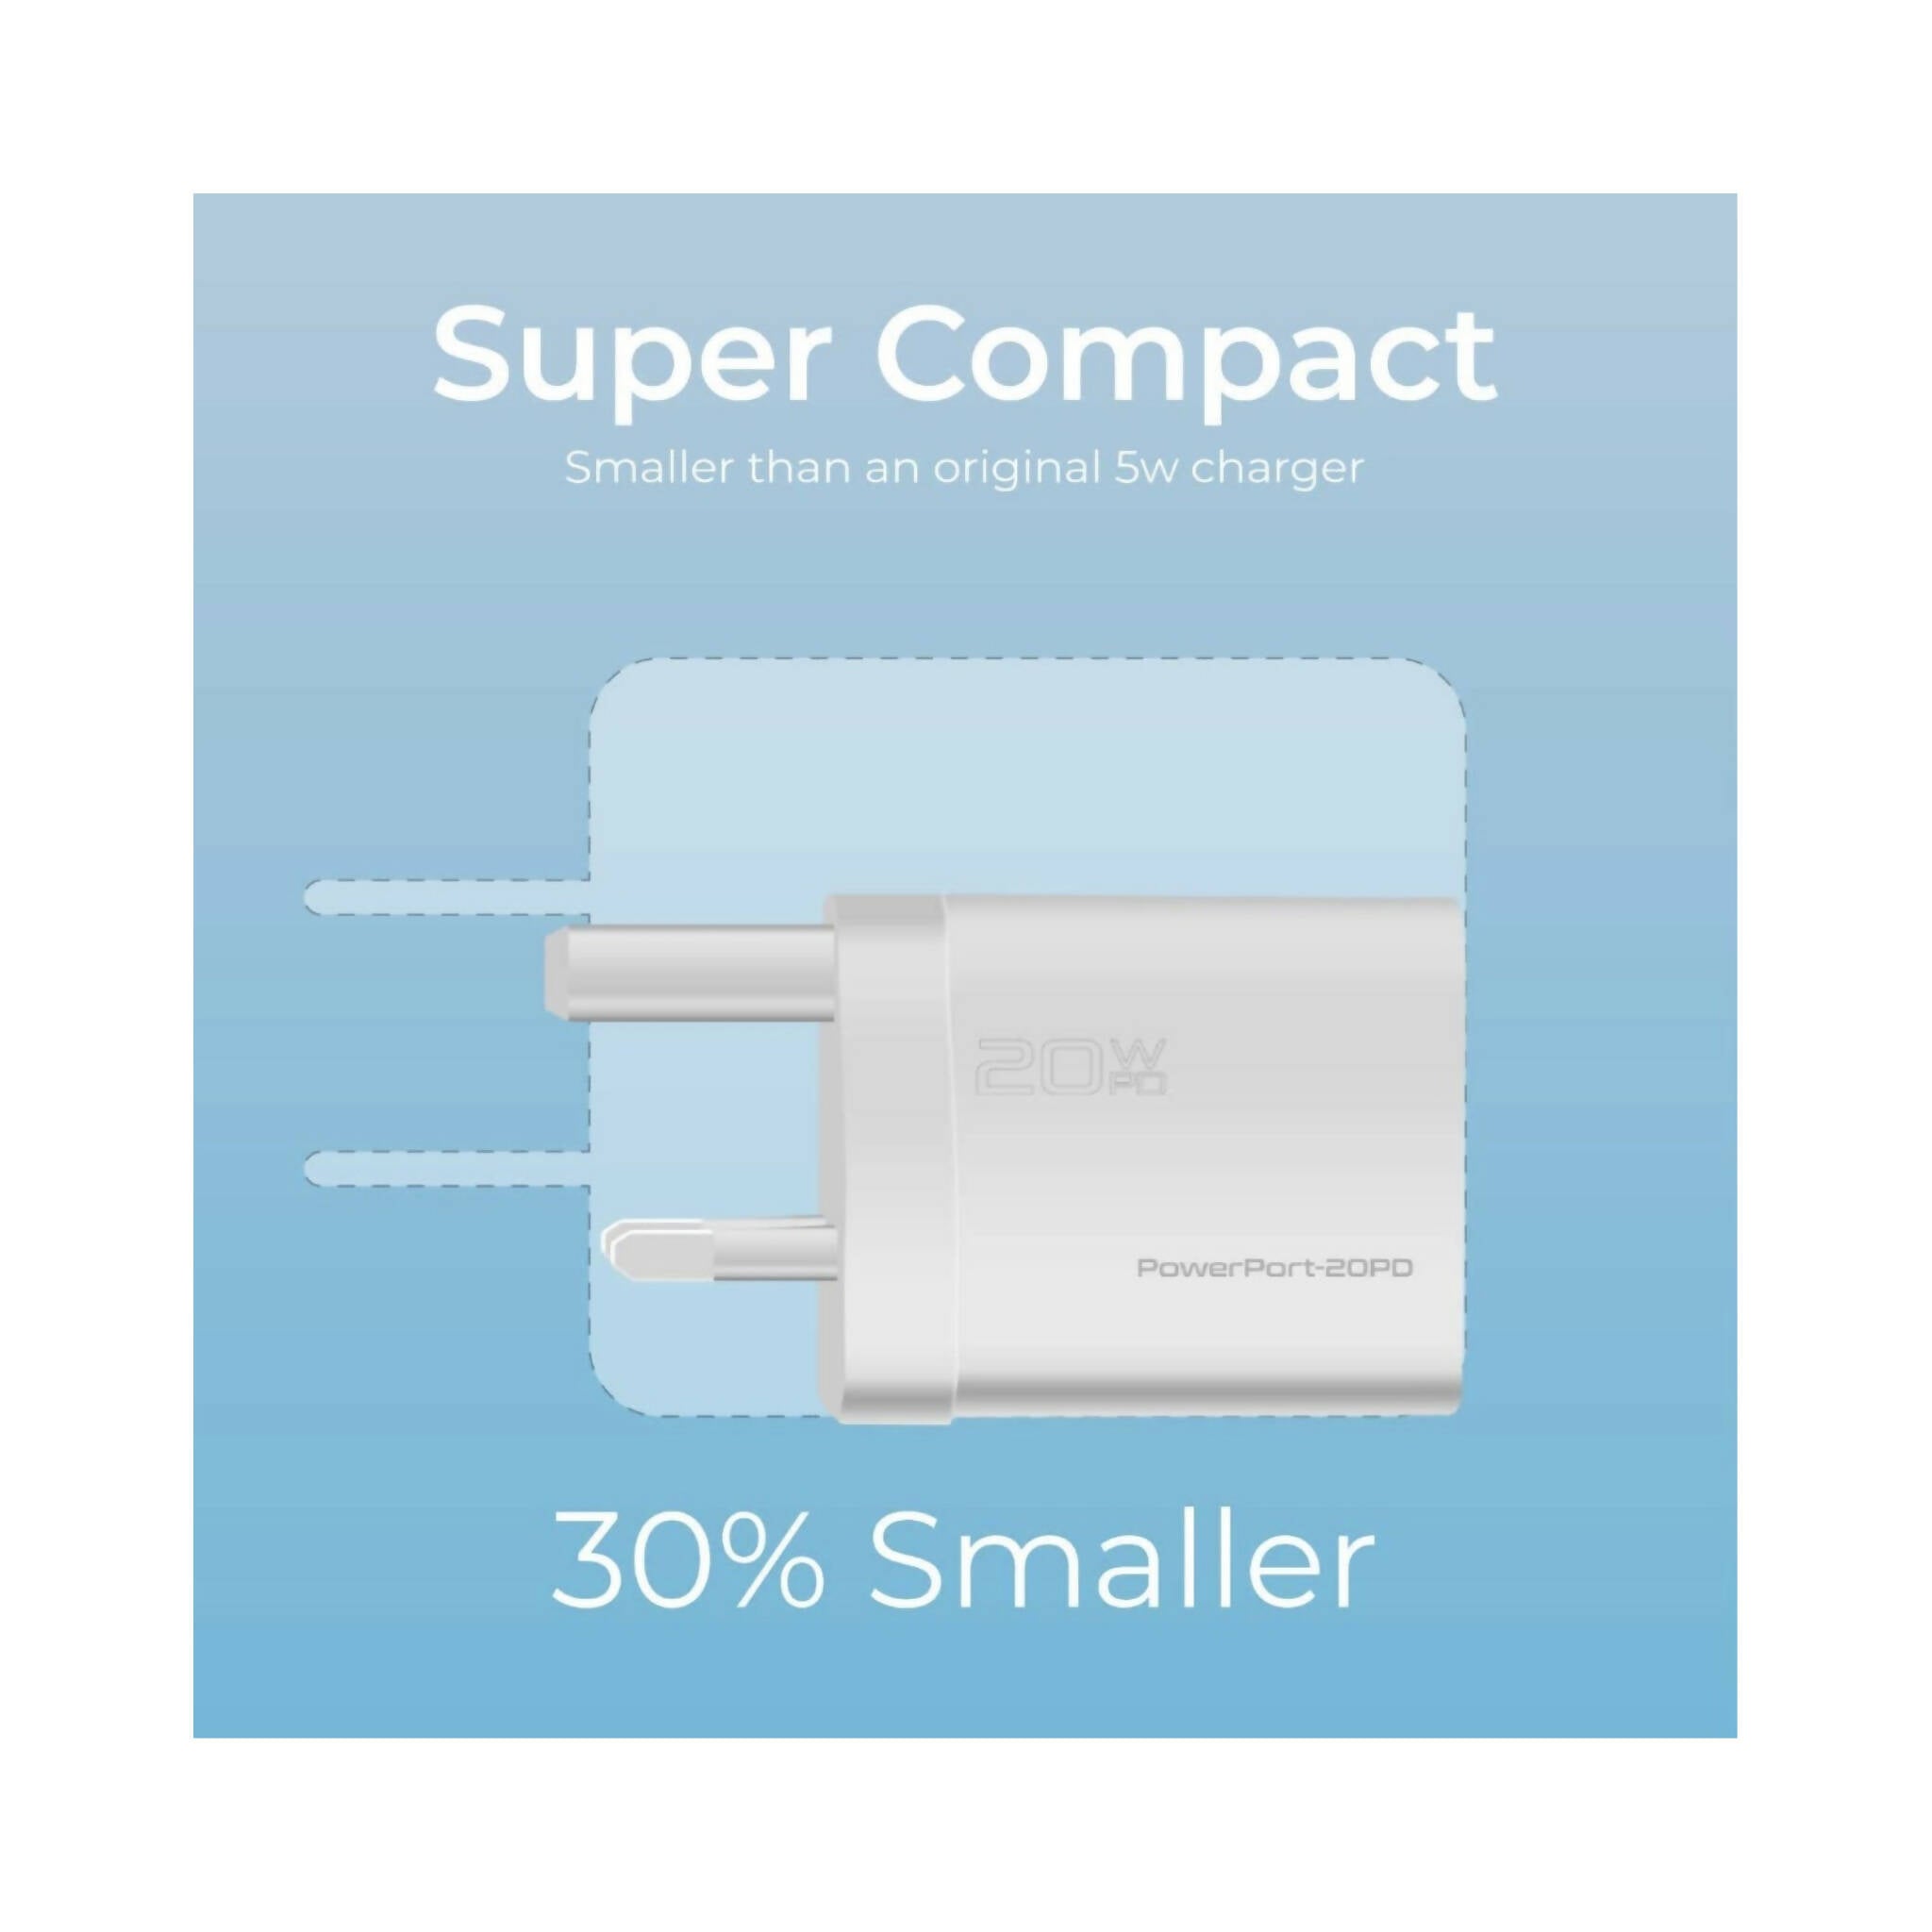 USB-C Charger: 20W, Type-C Wall Adapter with Power Delivery